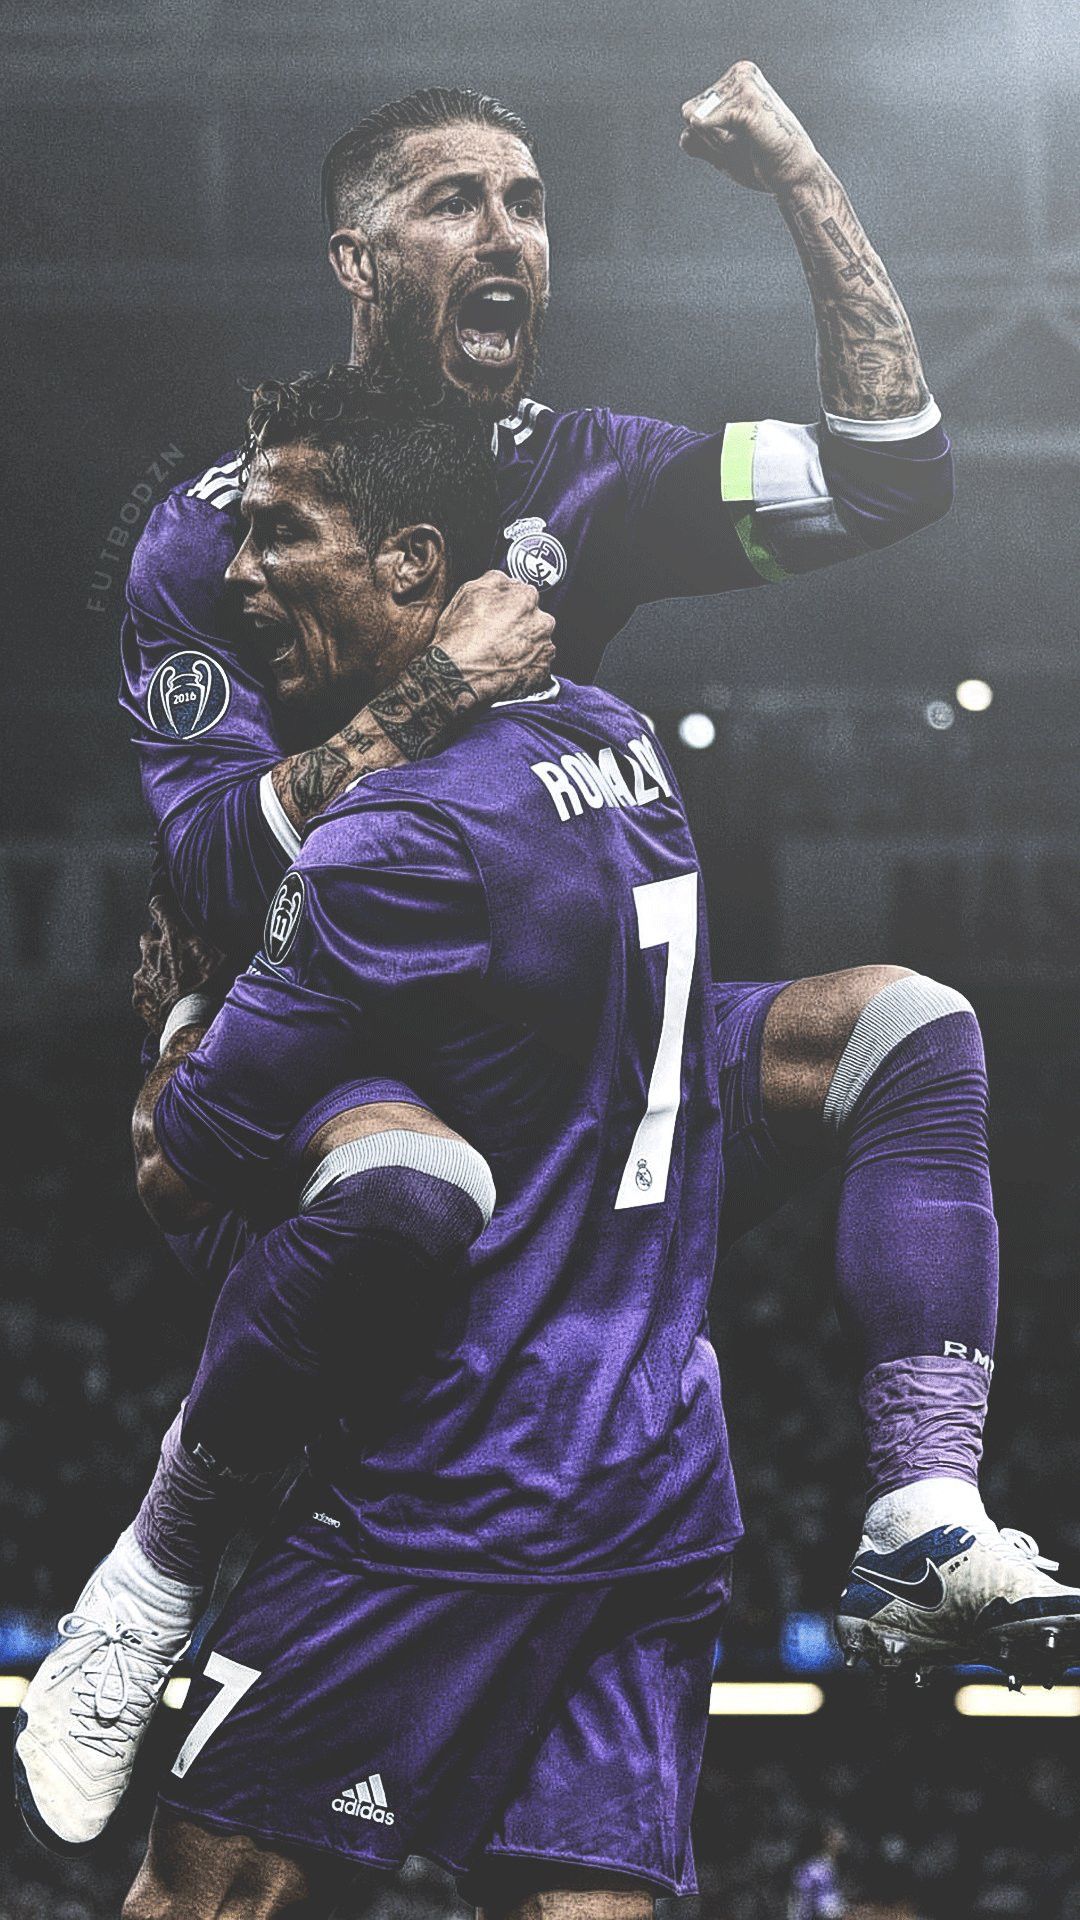 CR7 iPhone Wallpapers on WallpaperDog